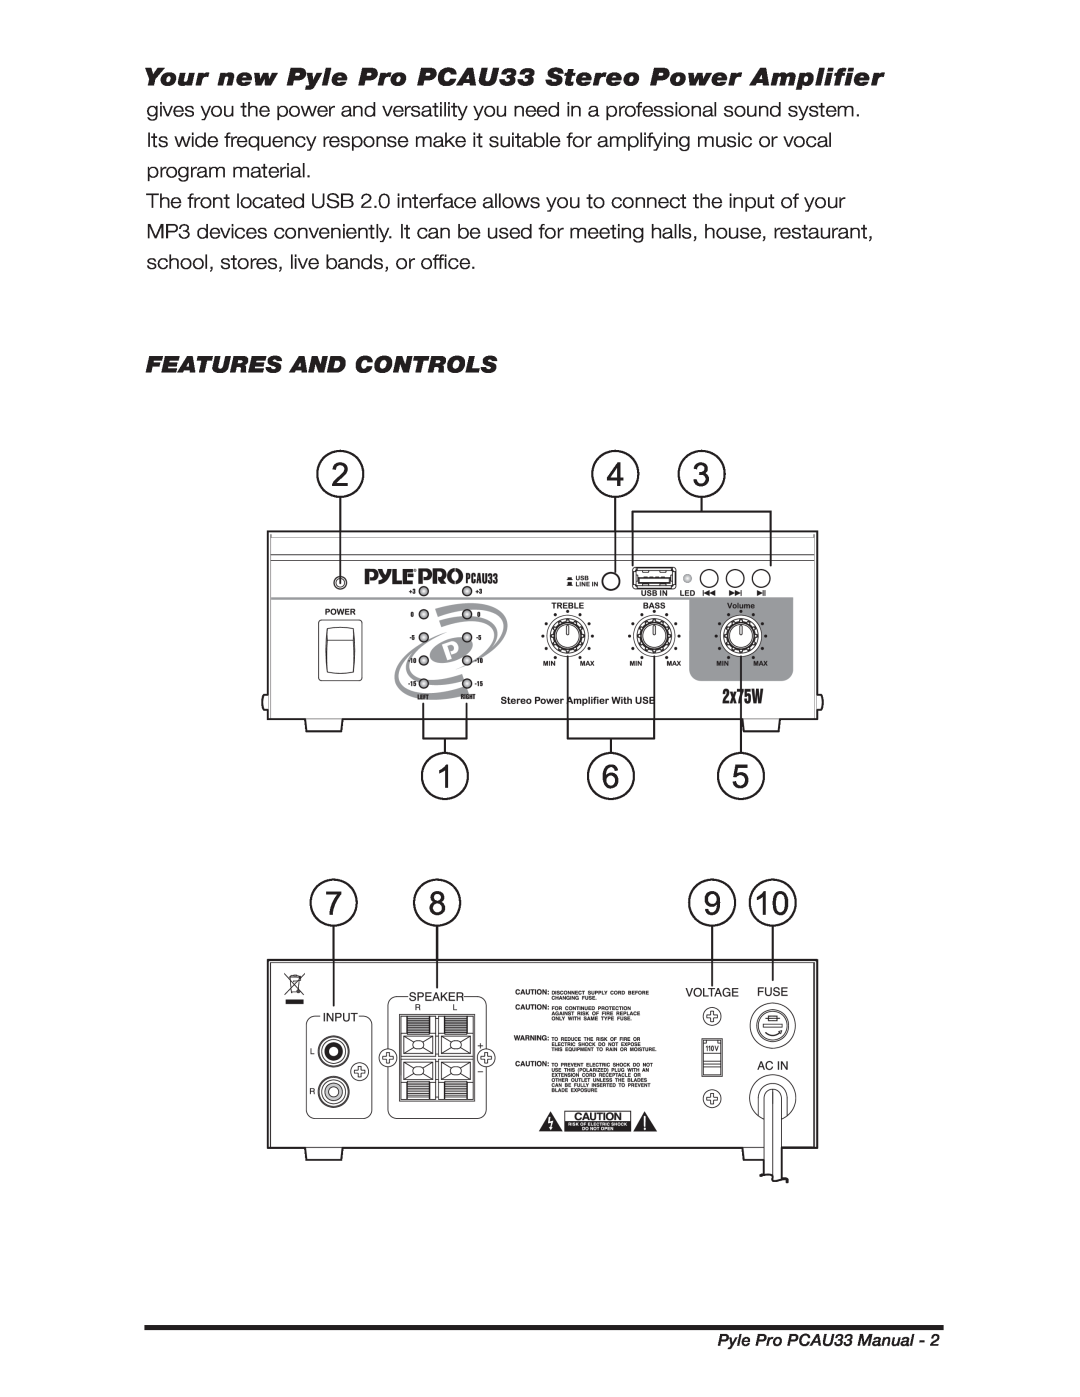 PYLE Audio manual Features And Controls, Your new Pyle Pro PCAU33 Stereo Power Amplifier 